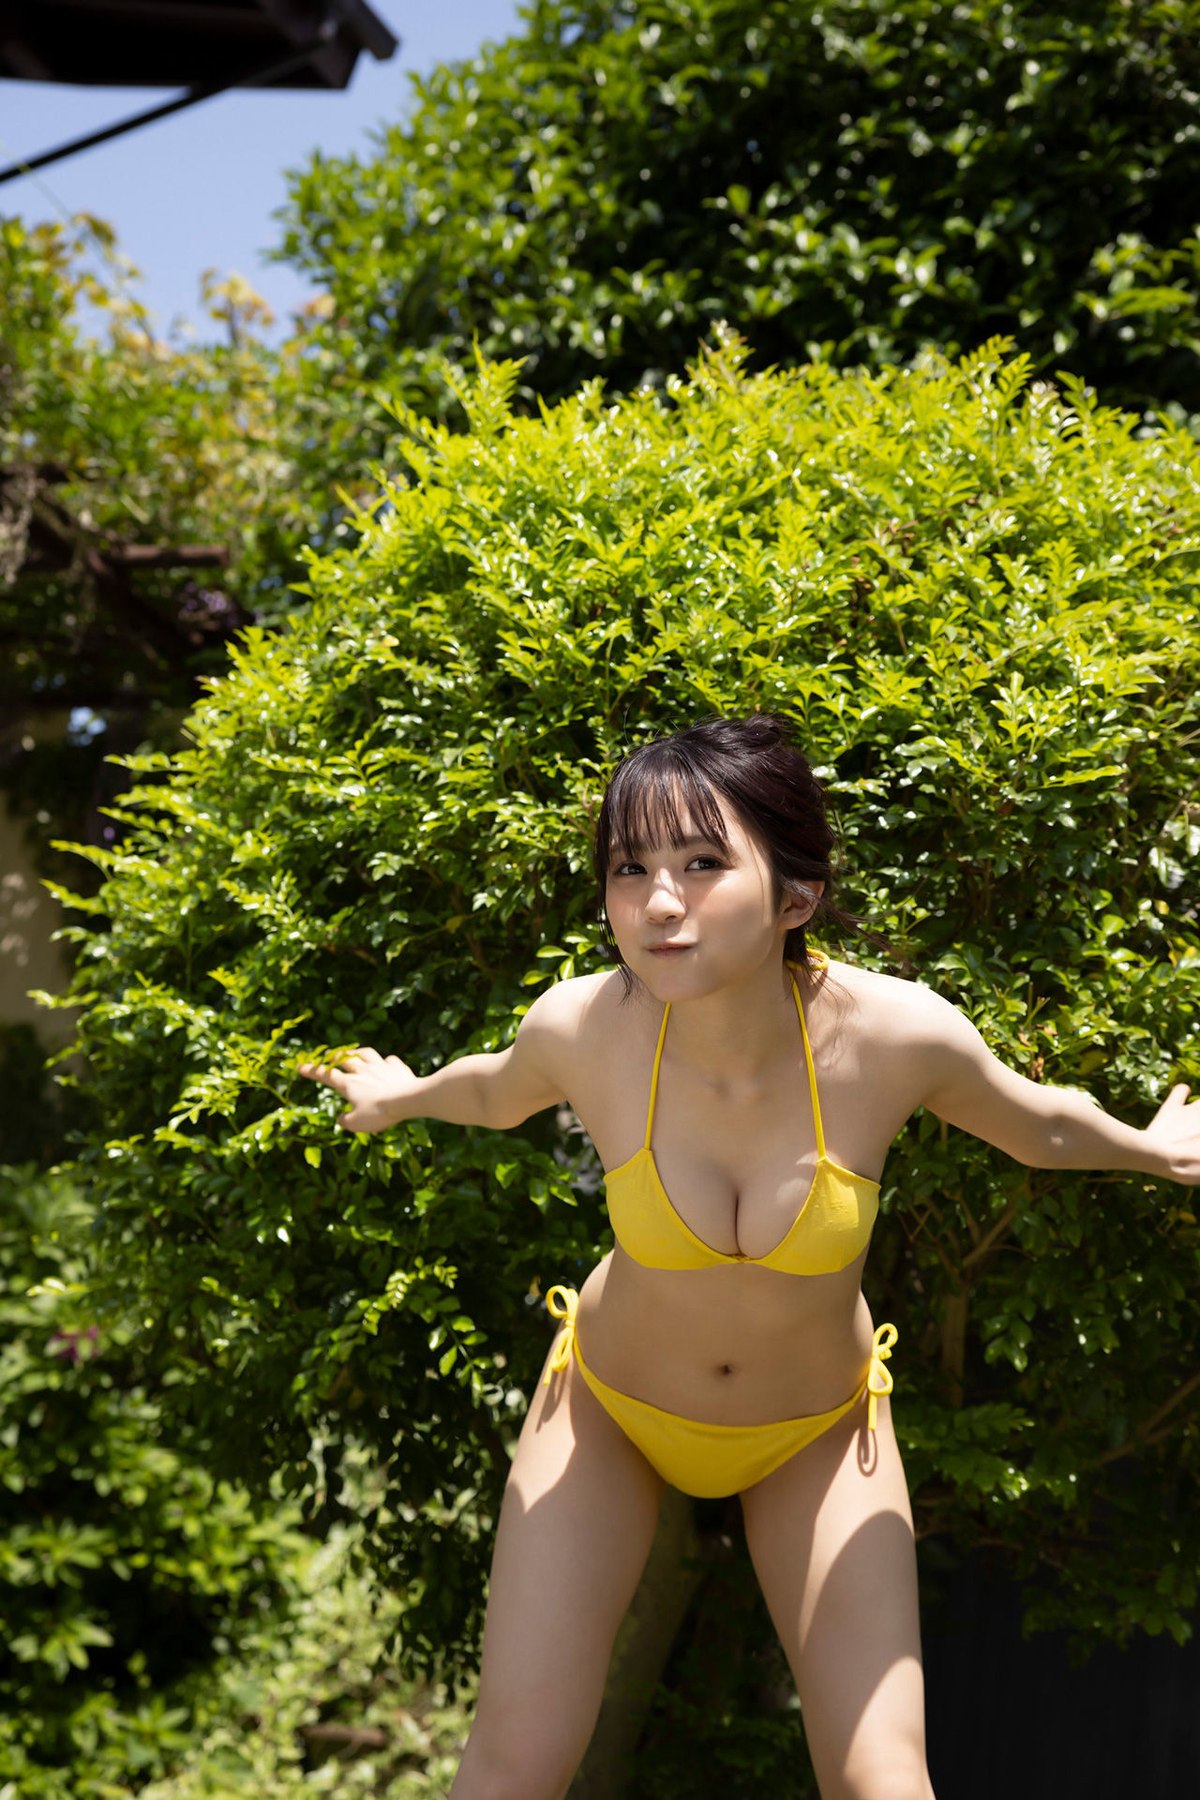 FLASH Photobook 2023 06 20 Tsumugi Hashimoto 橋本つむぎ The Best In Osaka Is The Best In Japan 0051 1684886252.jpg